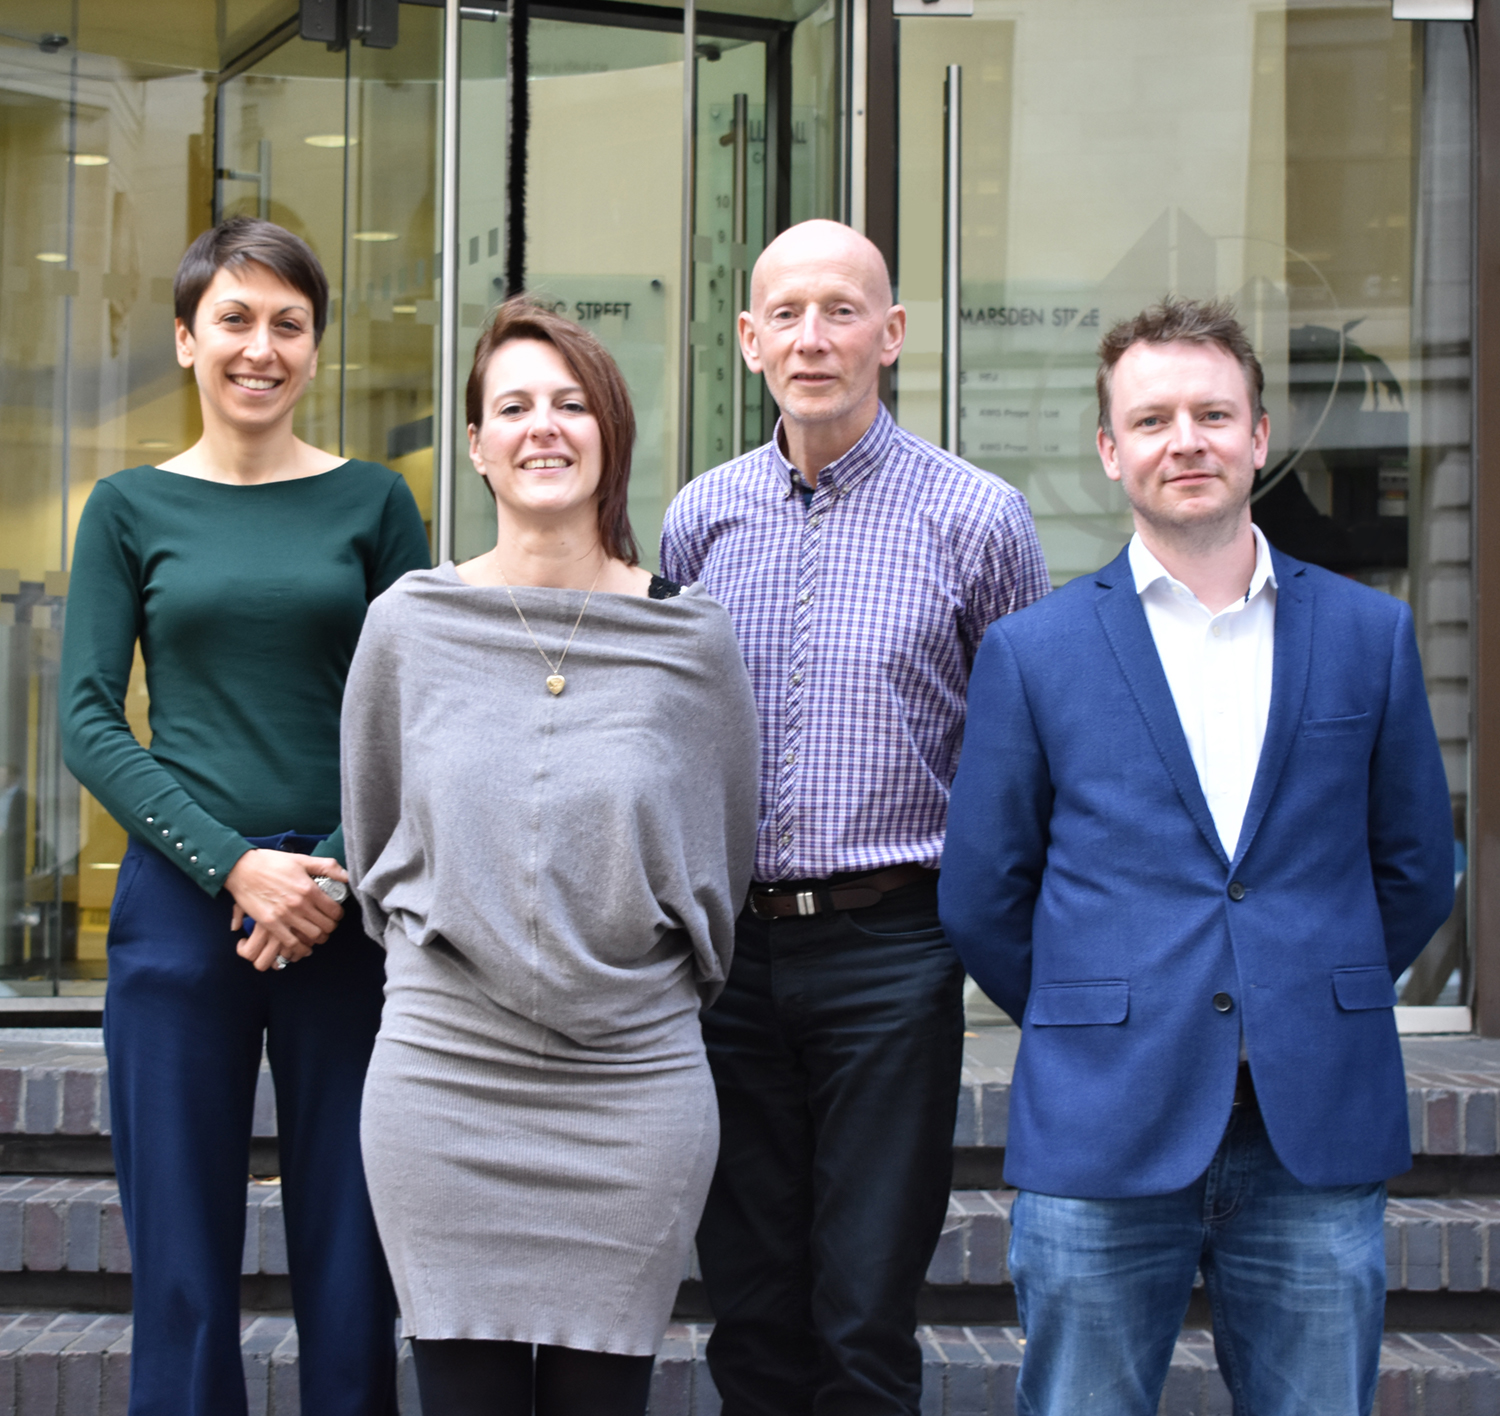 Image (L to R): Joanna Cherry (Finance Director), Valentina Moise (Commercial Director), Gary Pyatt (Sales Director) and Phil Windas (Marketing Director)